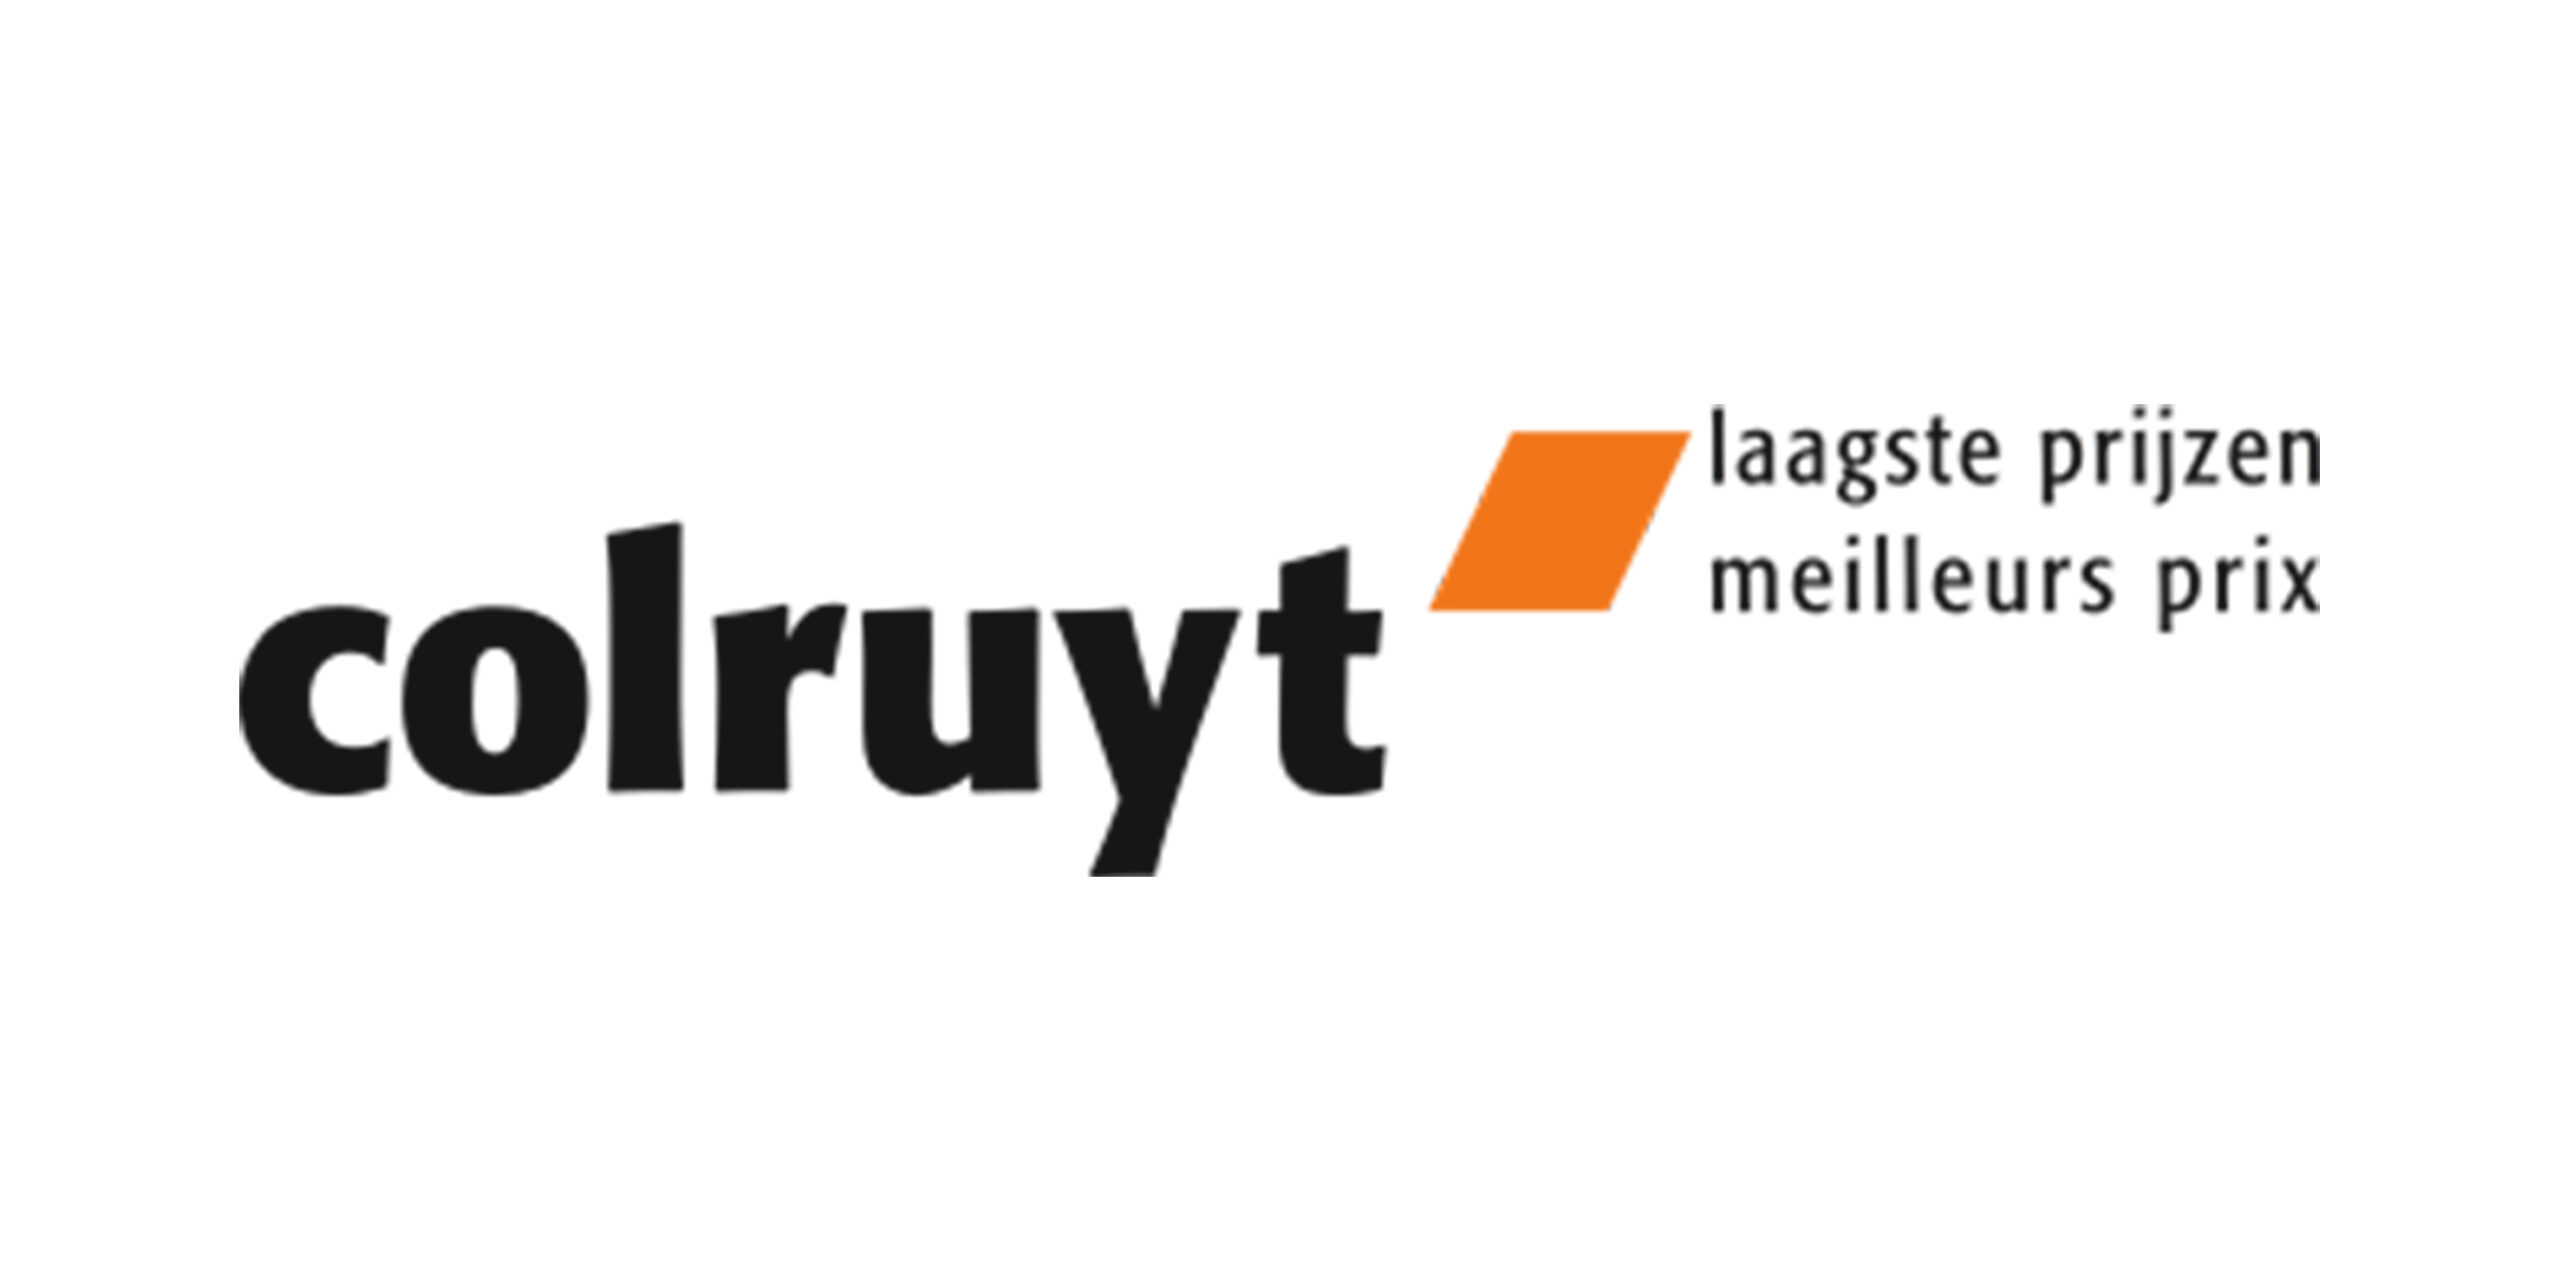 //www.maplab.be/wp-content/uploads/2020/12/Colruyt-logo-scaled.jpg